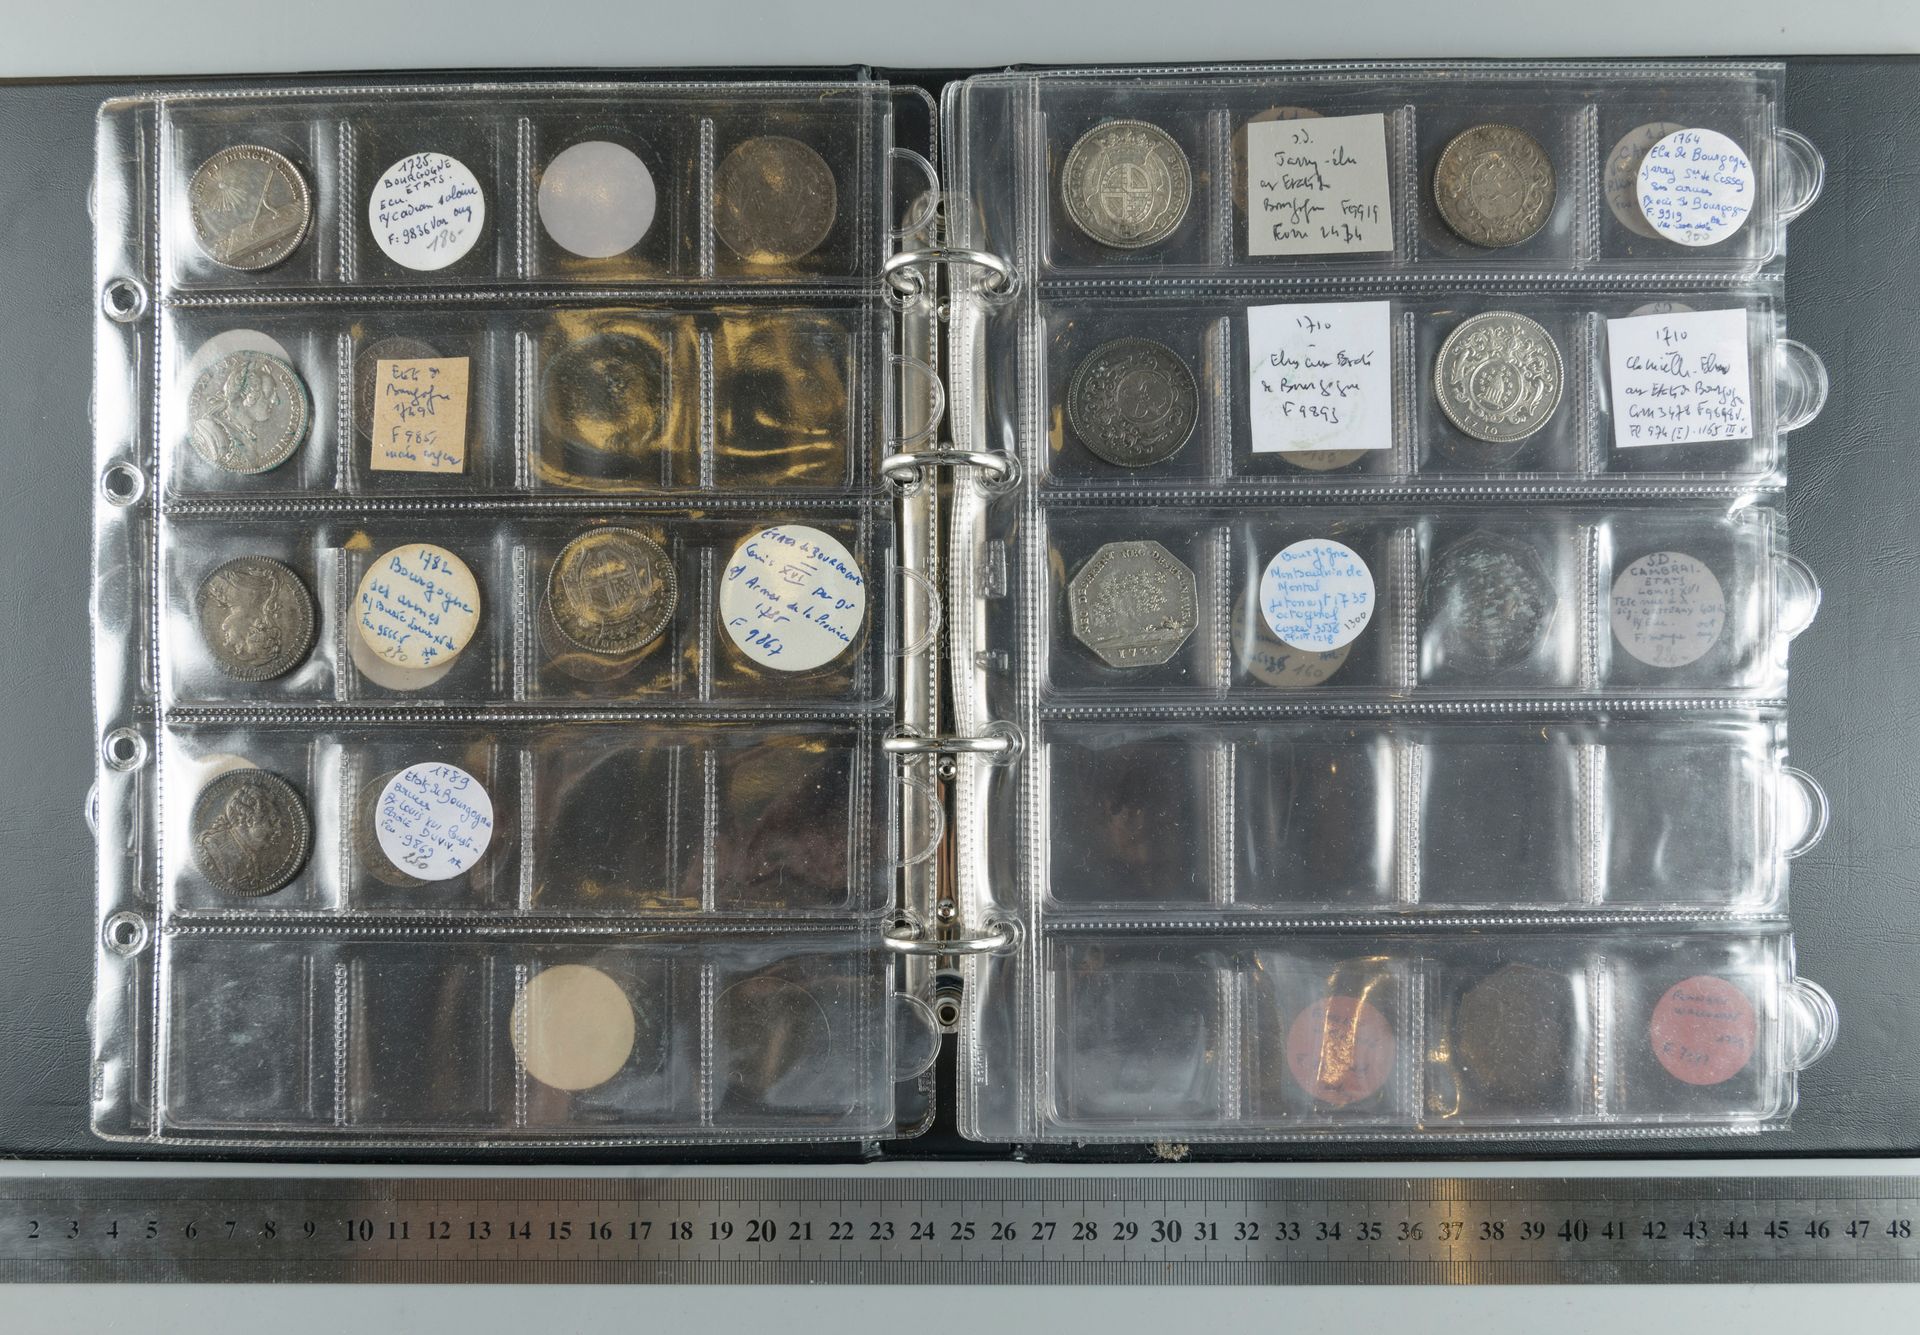 Null States of Burgundy, Cambrai and Flanders. Binder with 24 silver tokens